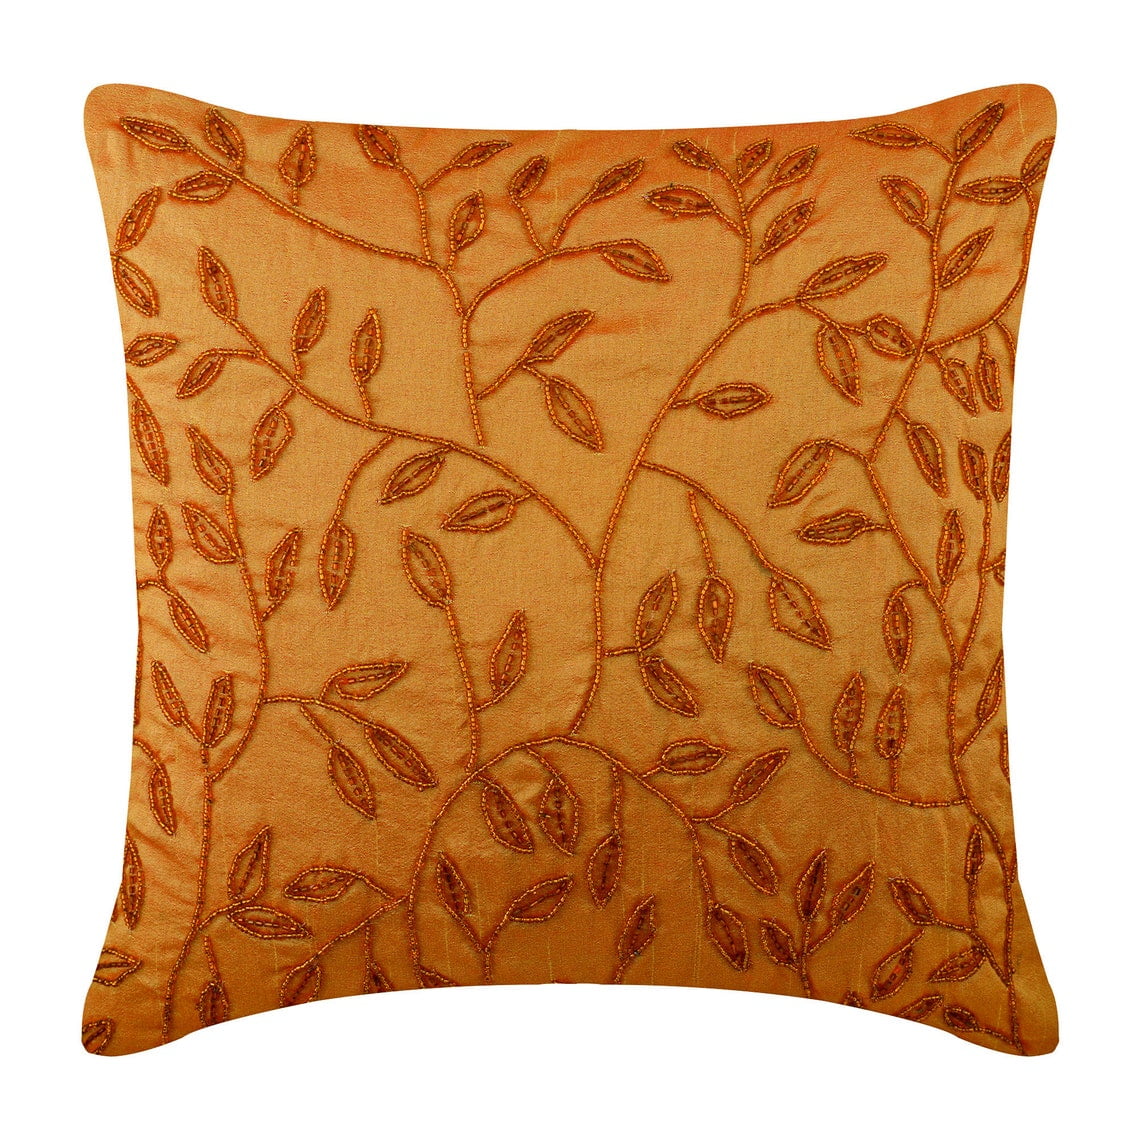 Personalized Accent Pillow Cover with a Tropical Leaf Design